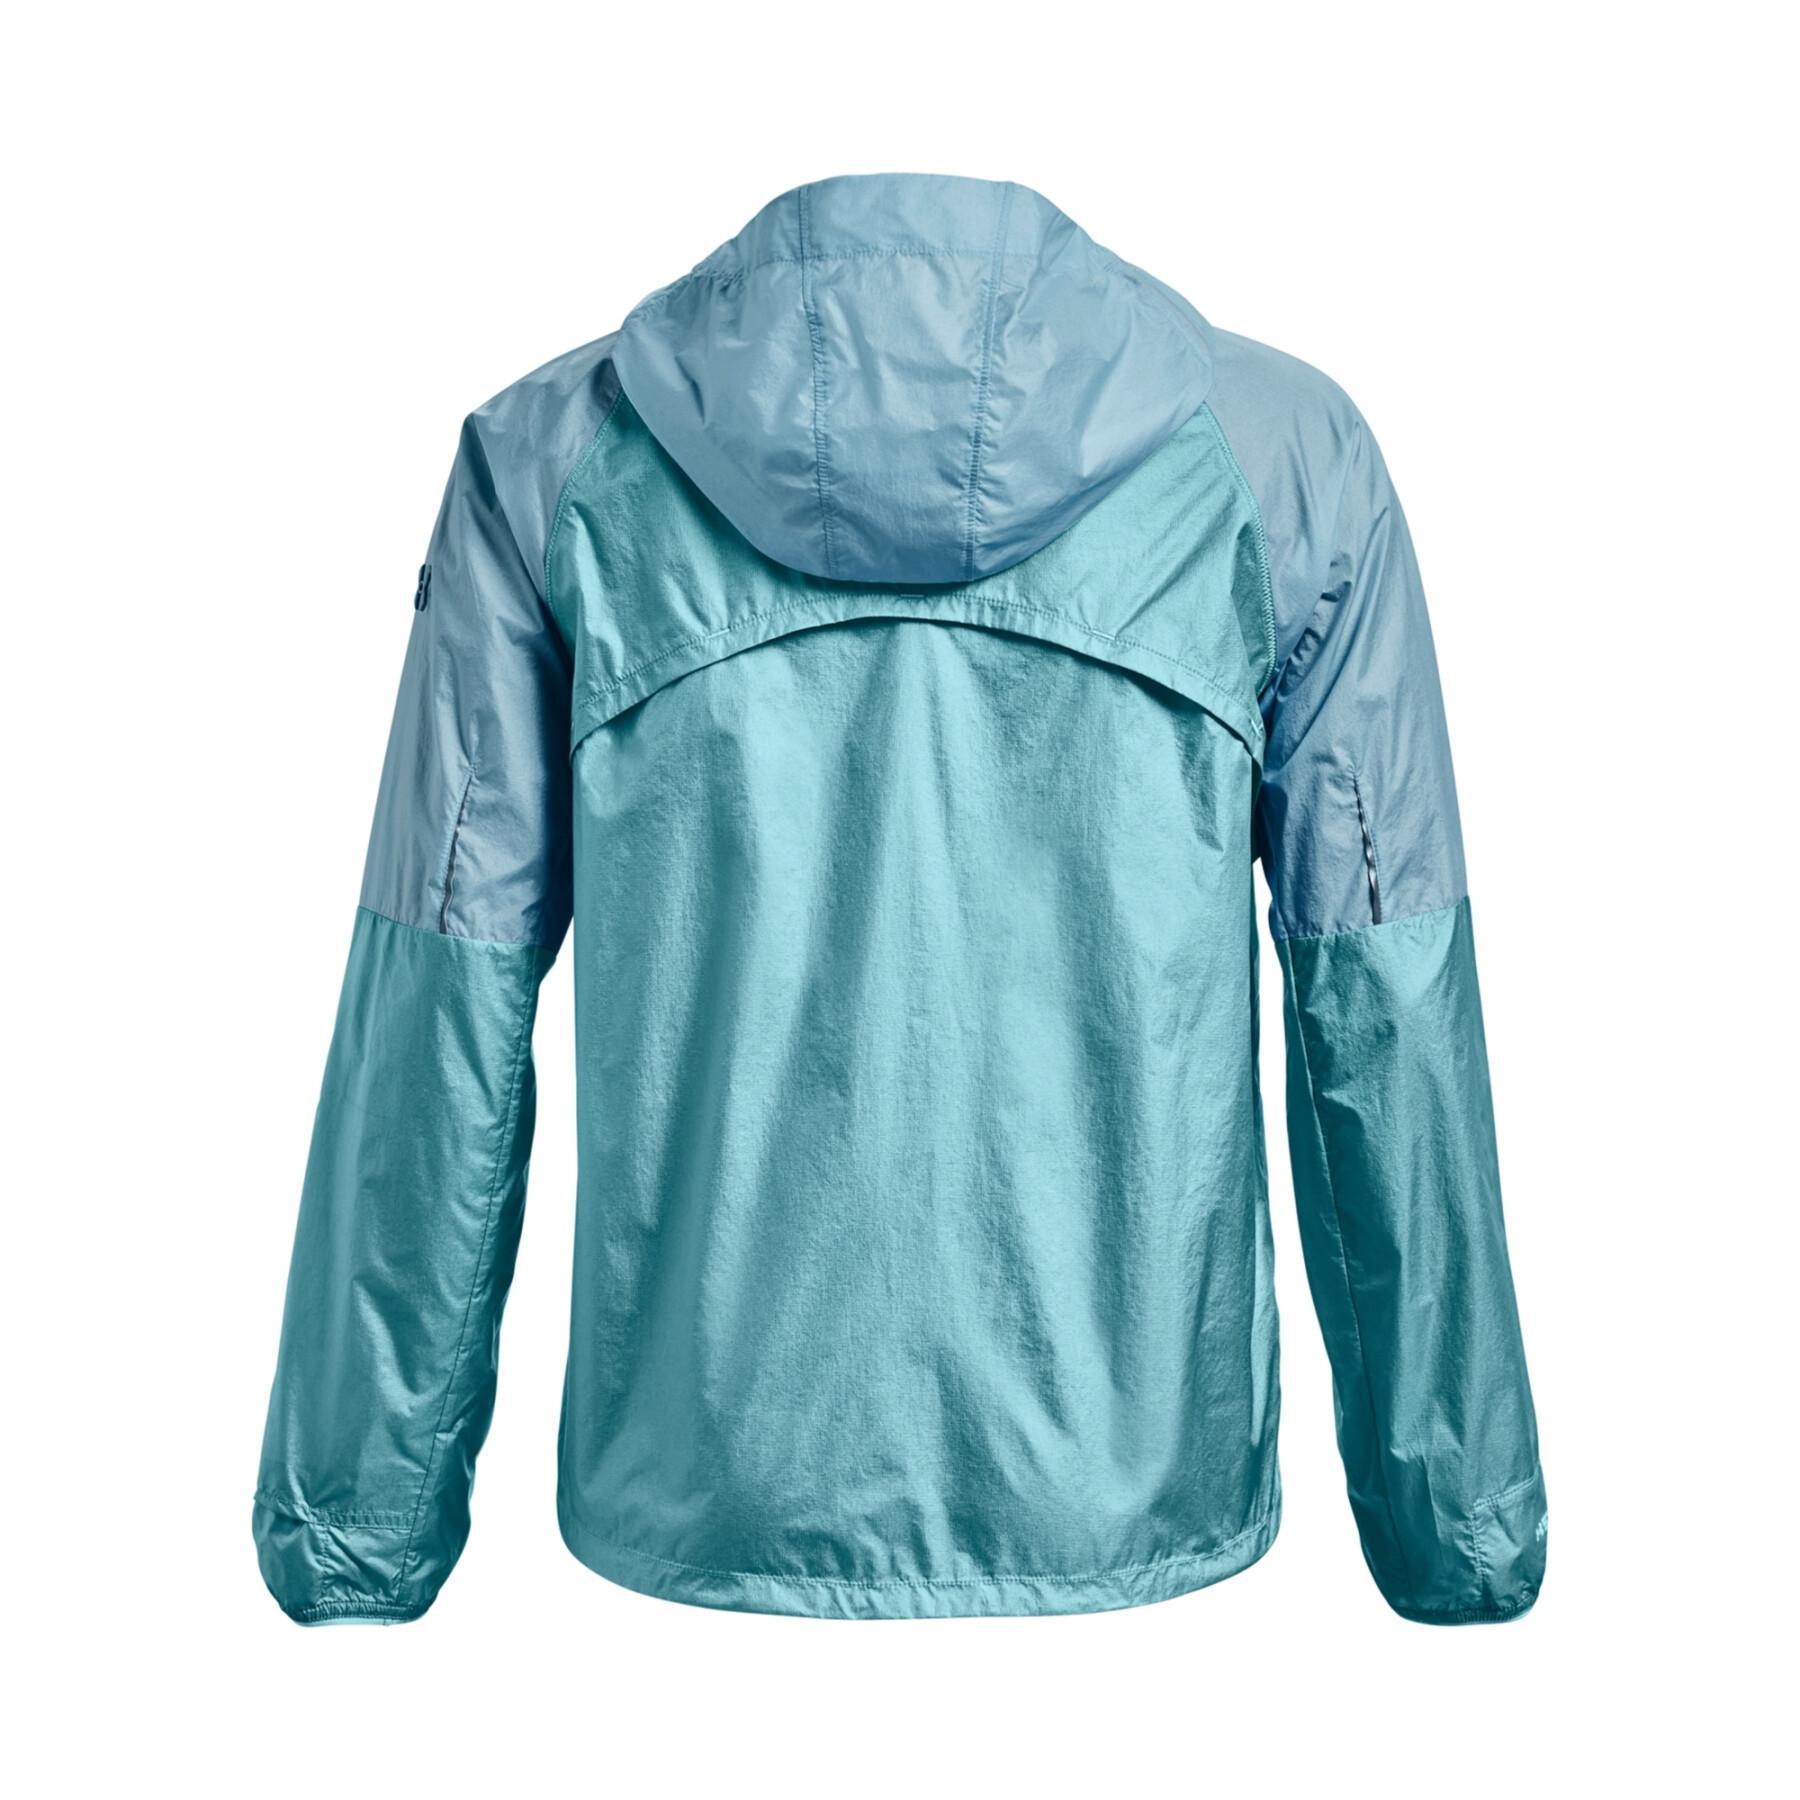 Chaqueta impermeable para mujer Under Armour Impasse trail